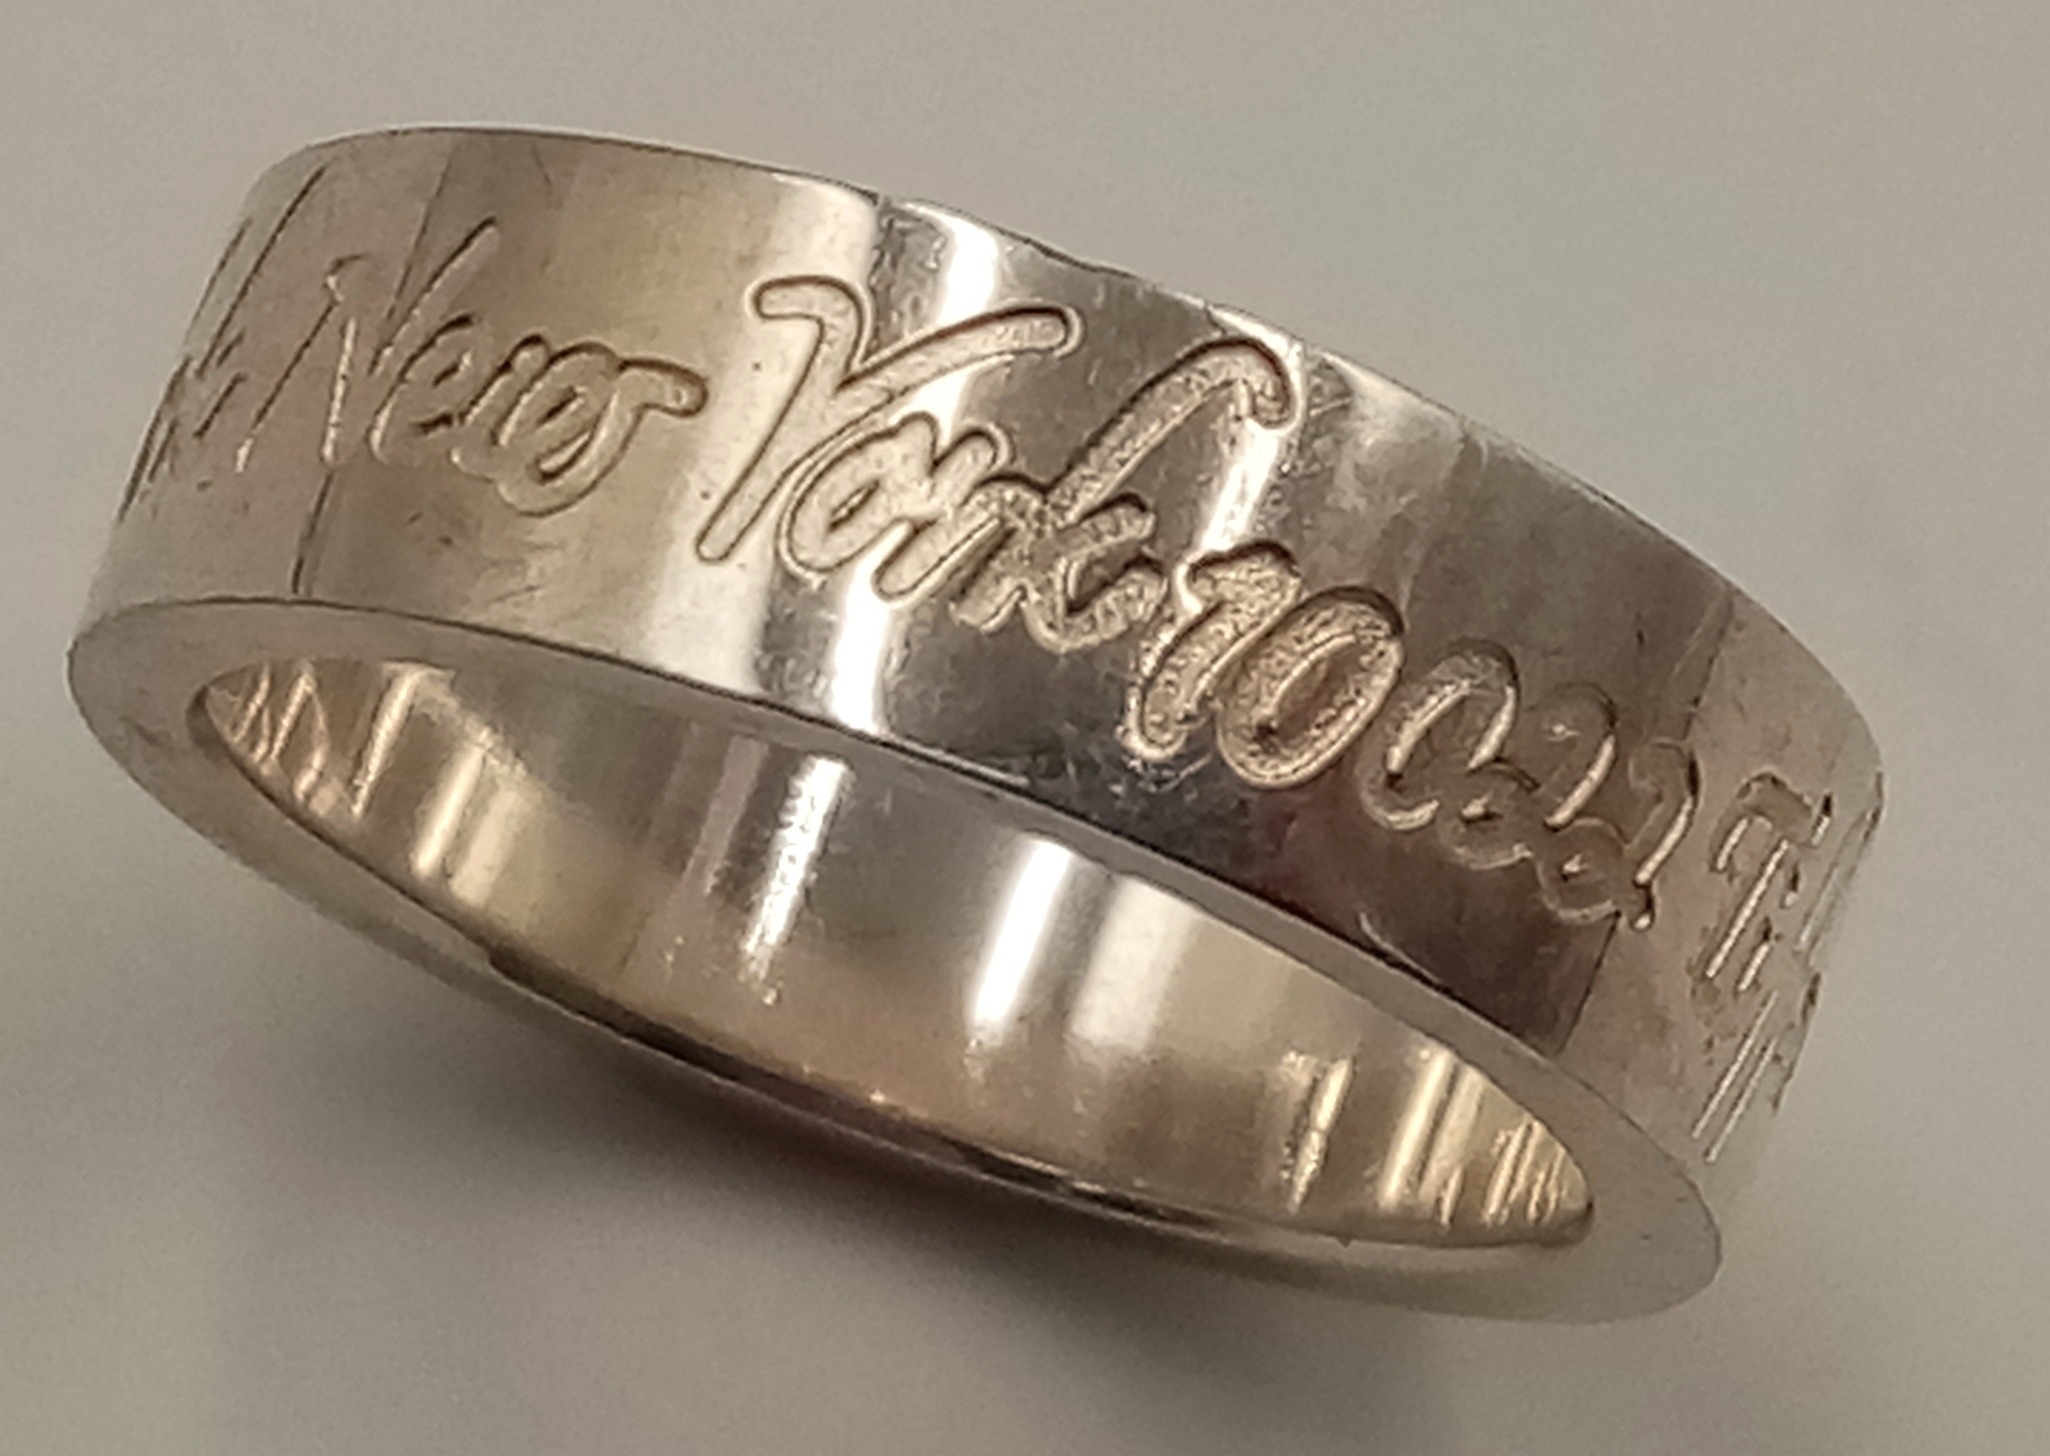 A TIFFANY & CO STERLING SILVER BAND RING, 727 NEW YORK FIFTH AVENUE. Size N, 5g total weight. Ref: - Image 3 of 5